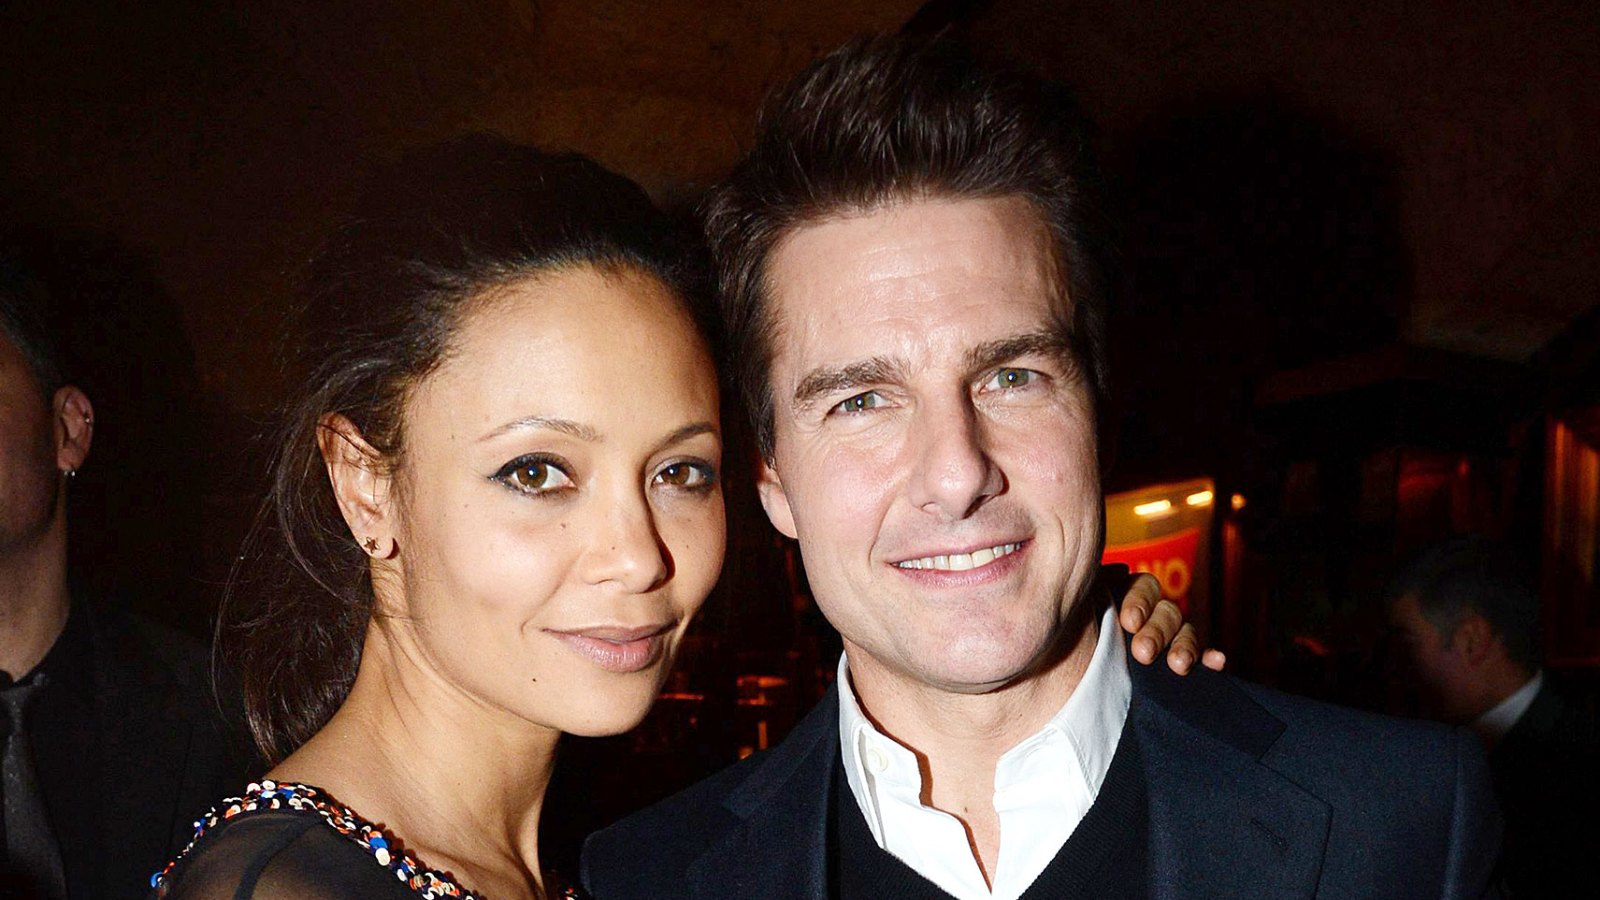 Thandie Newton and Tom Cruise at Pre-BAFTA Dinner Thandie Newton Recalls Tom Cruise Giving Her a Book With the Greatest Hits of Scientology for Christmas